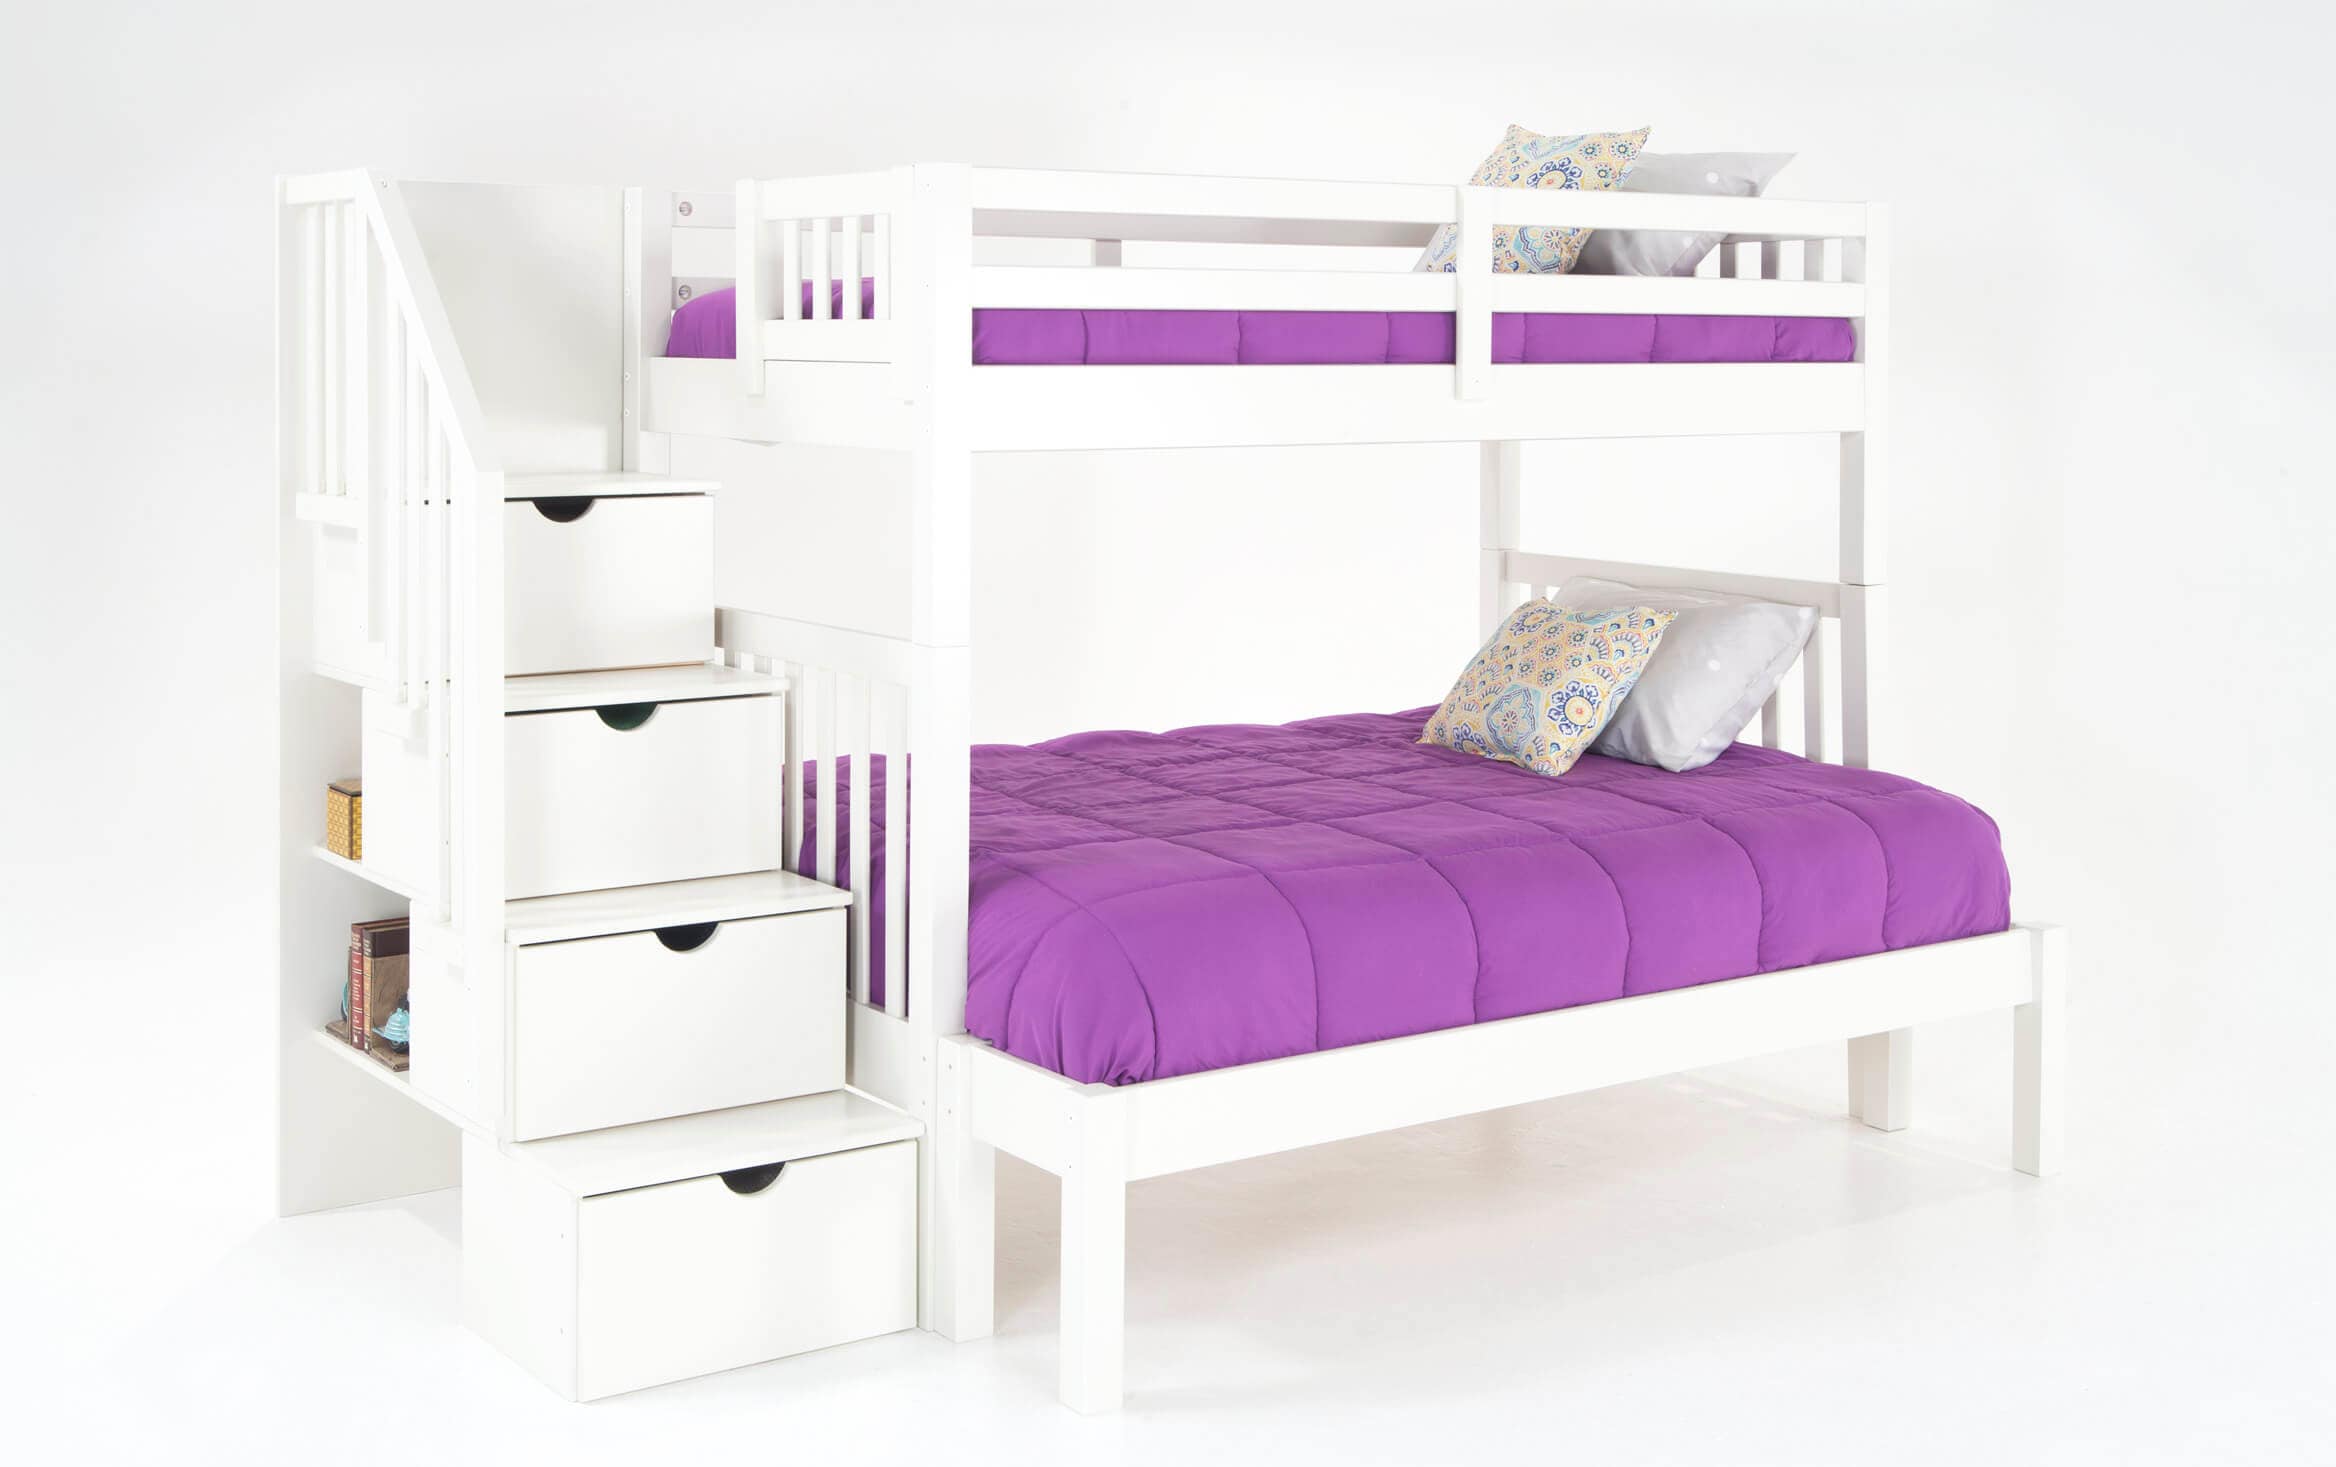 Bobs Loft Bed Off 55 Ping, Bobs Bunk Beds